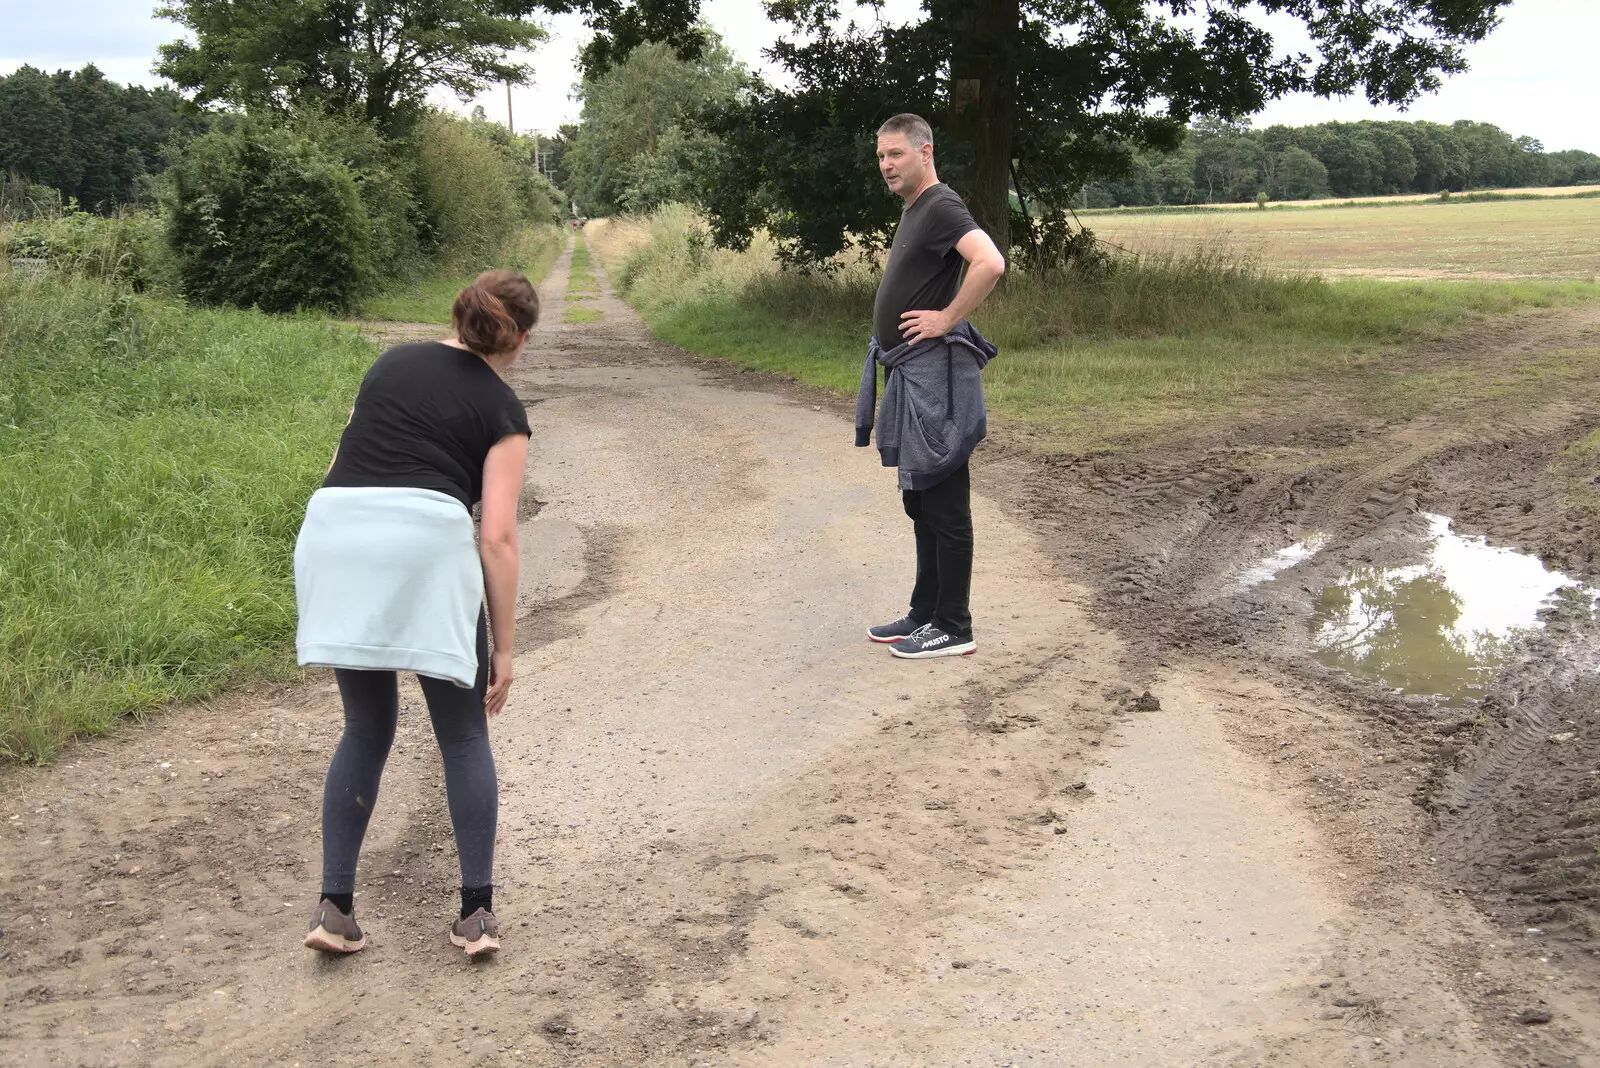 Isobel pauses on the Avenue, from Meg-fest, and Sean Visits, Bressingham and Brome, Suffolk - 1st August 2021